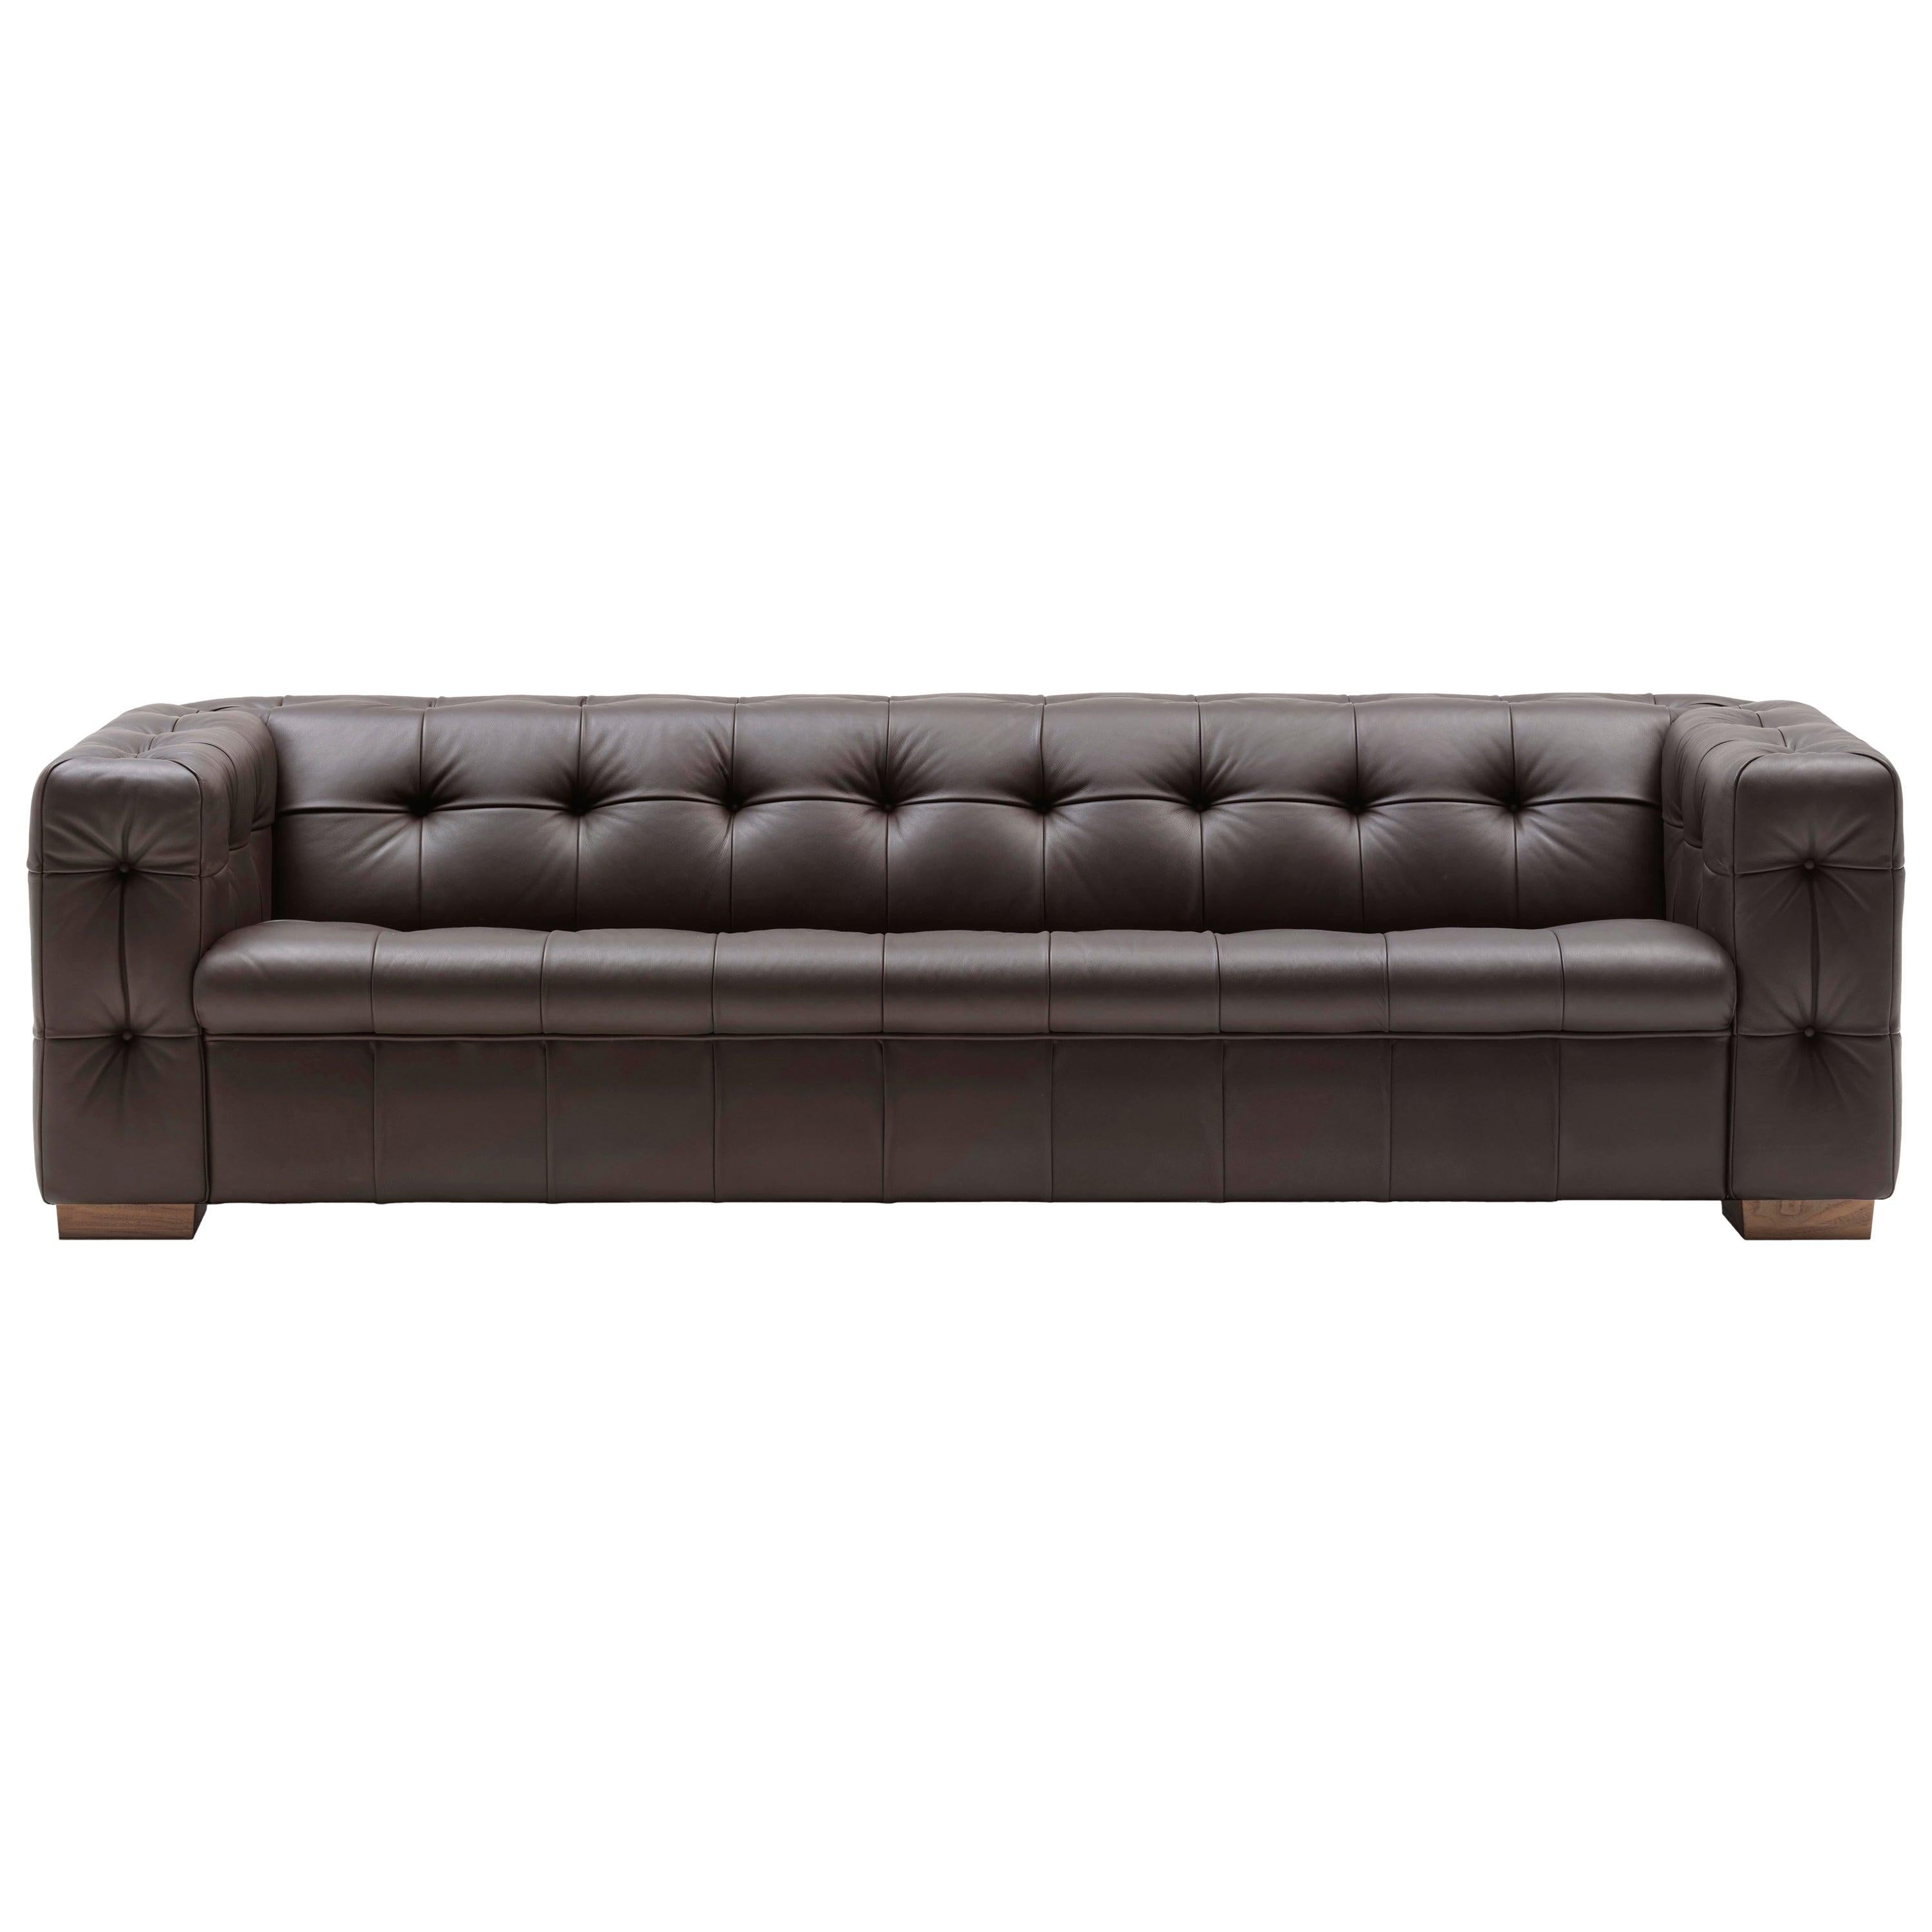 RH-306 Large Tufted Leather Chesterfield Sofa by Robert Haussmann